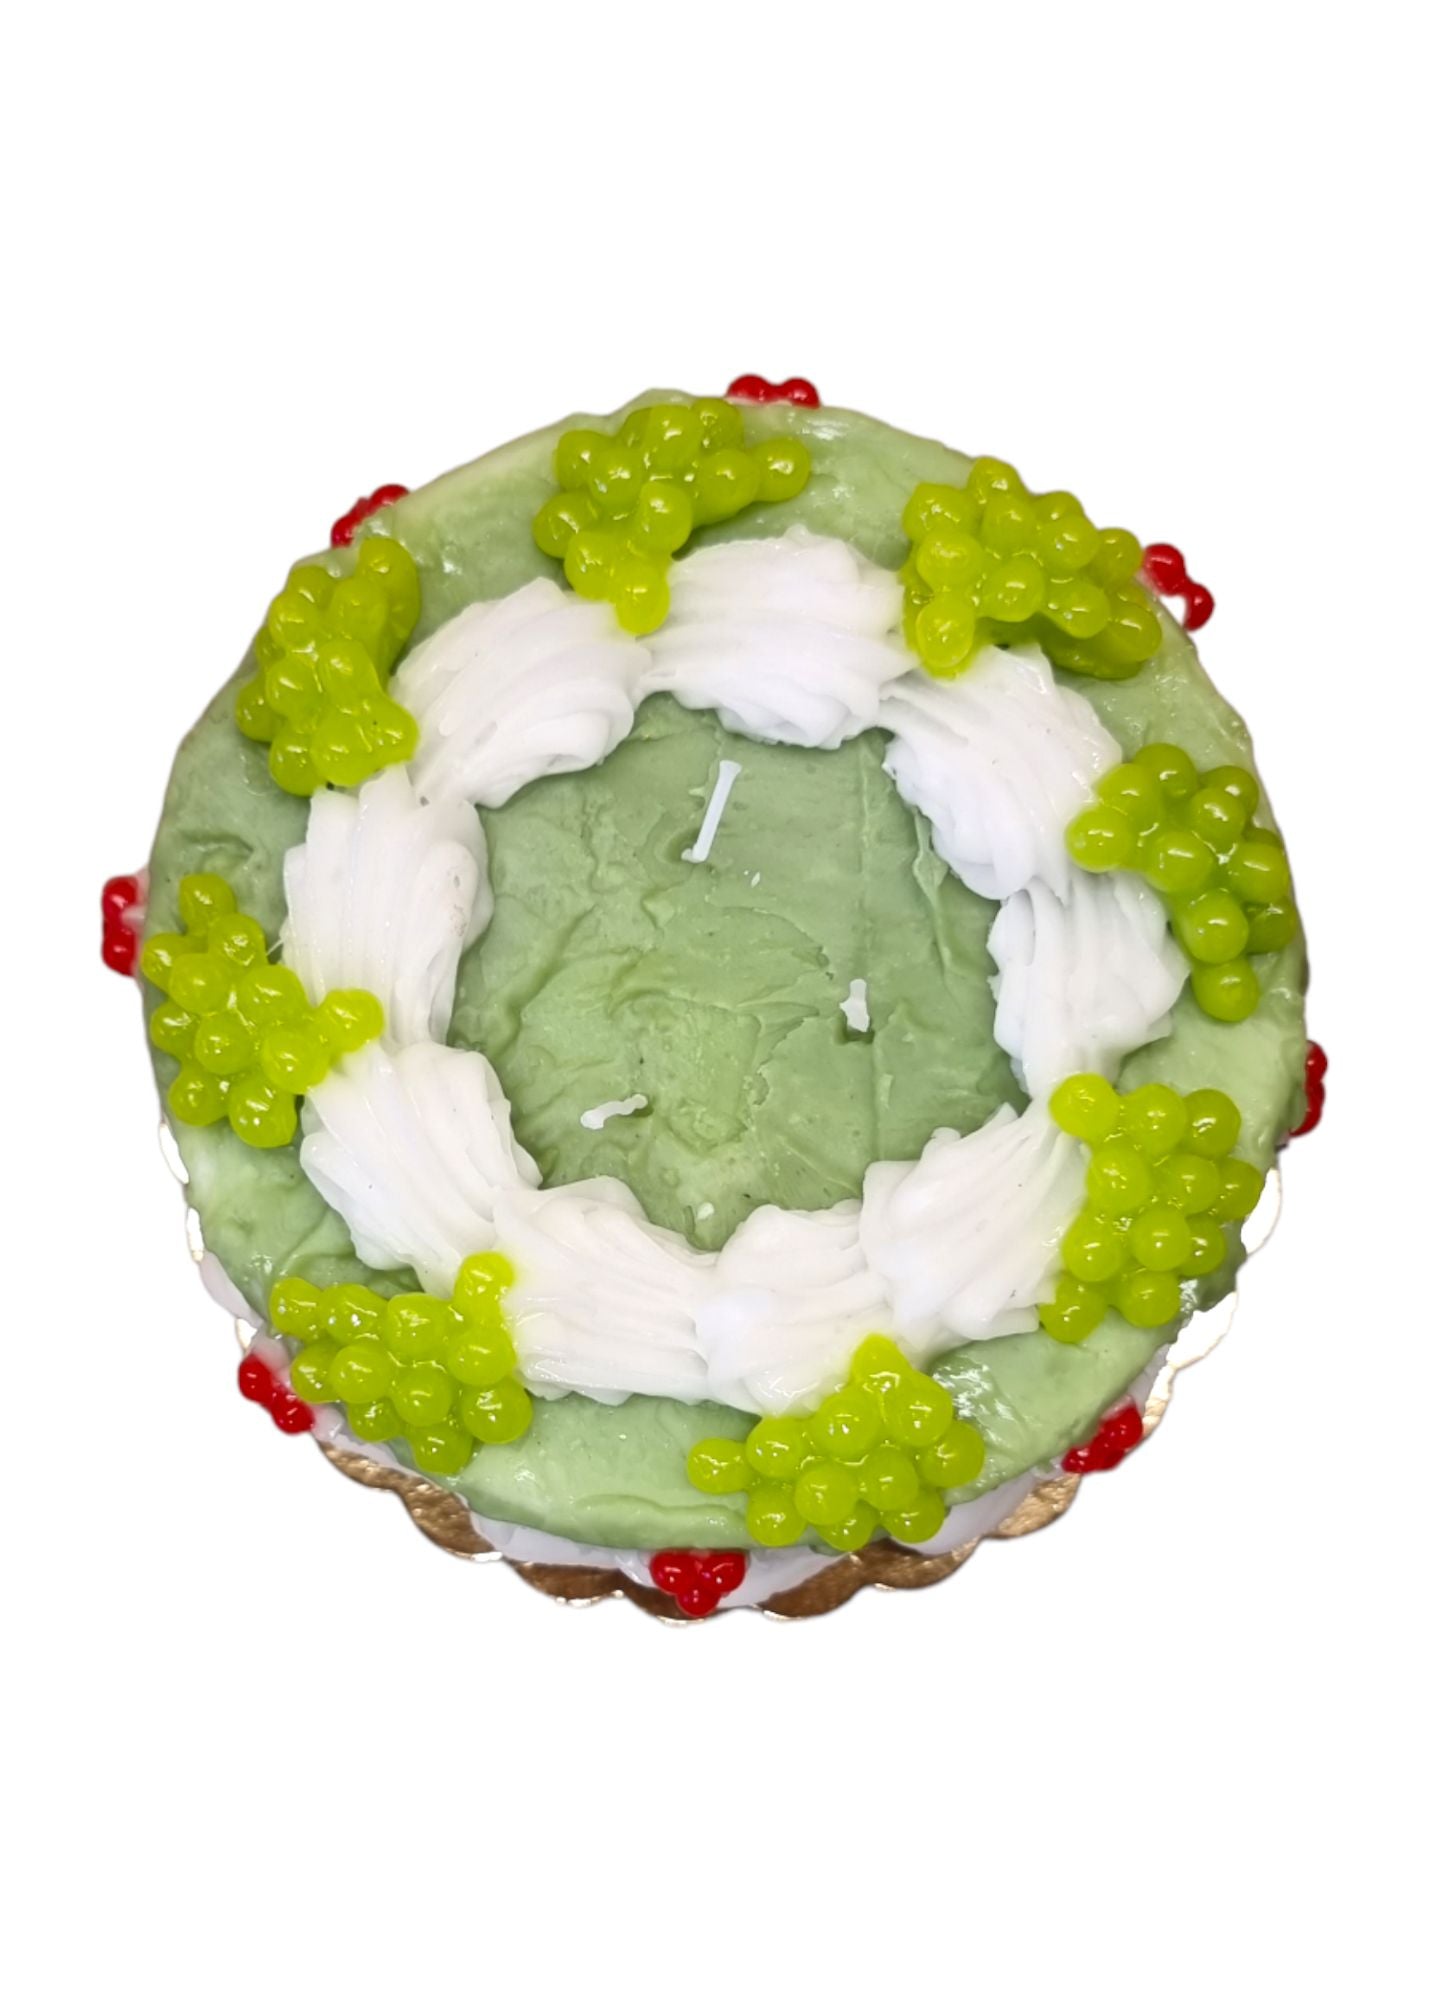 GREEN TIER CAKE CANDLE